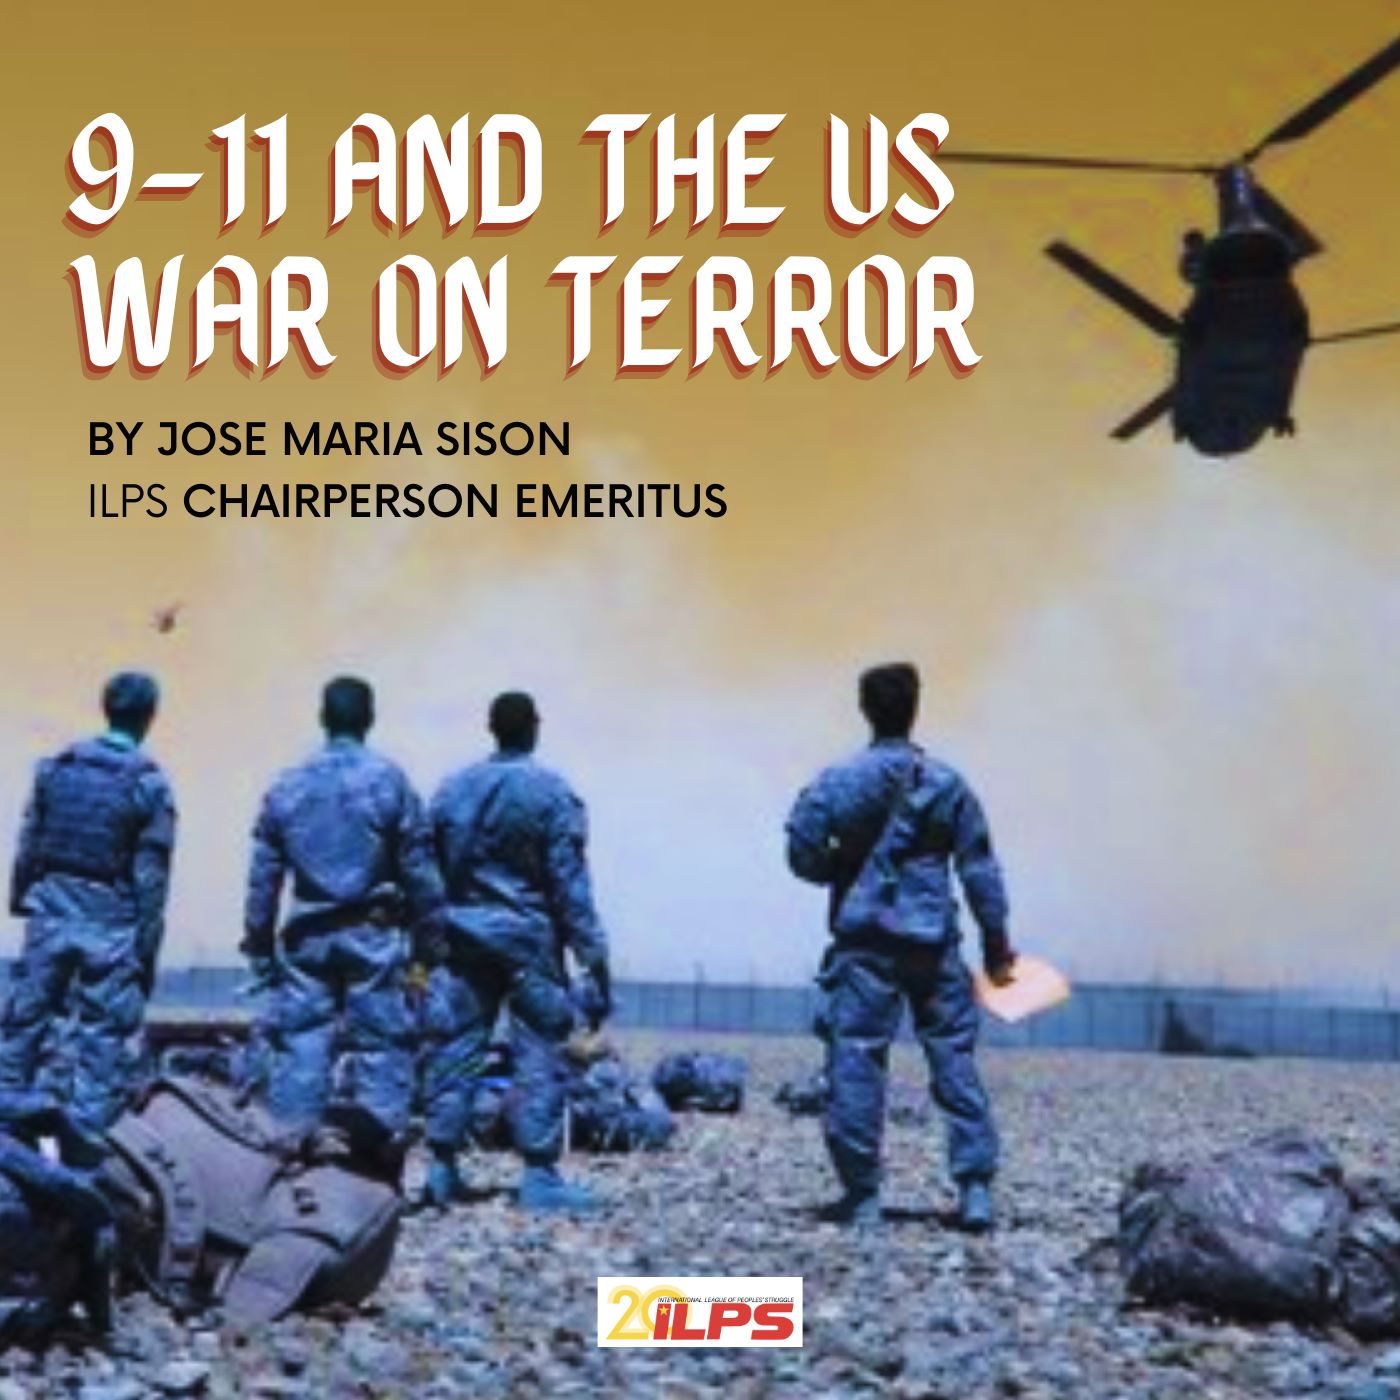 9-11 AND THE US WAR ON TERROR